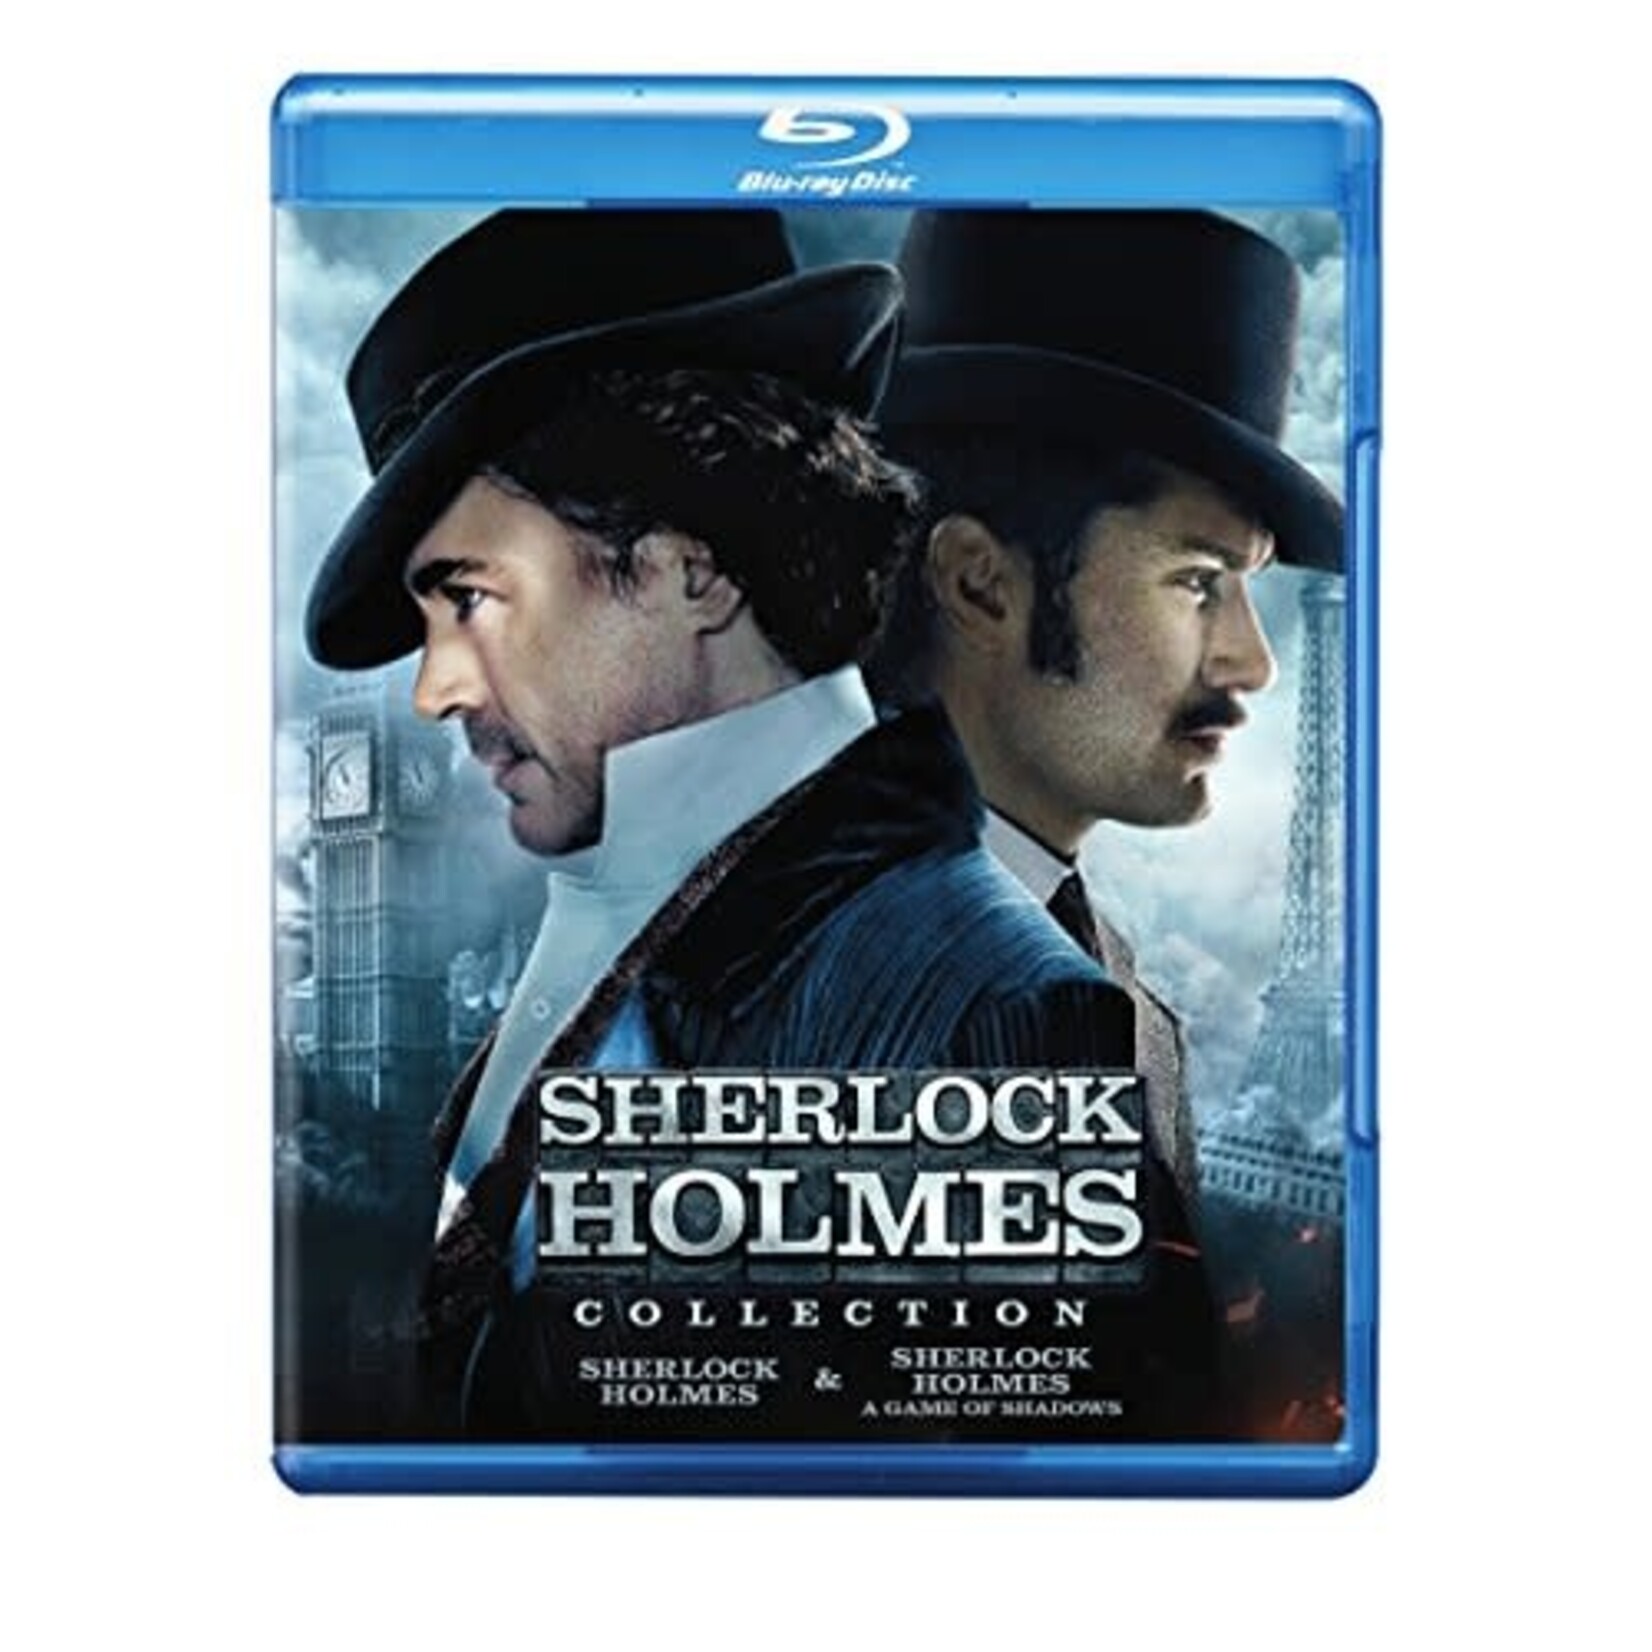 Sherlock Holmes - Collection [USED 2BRD]